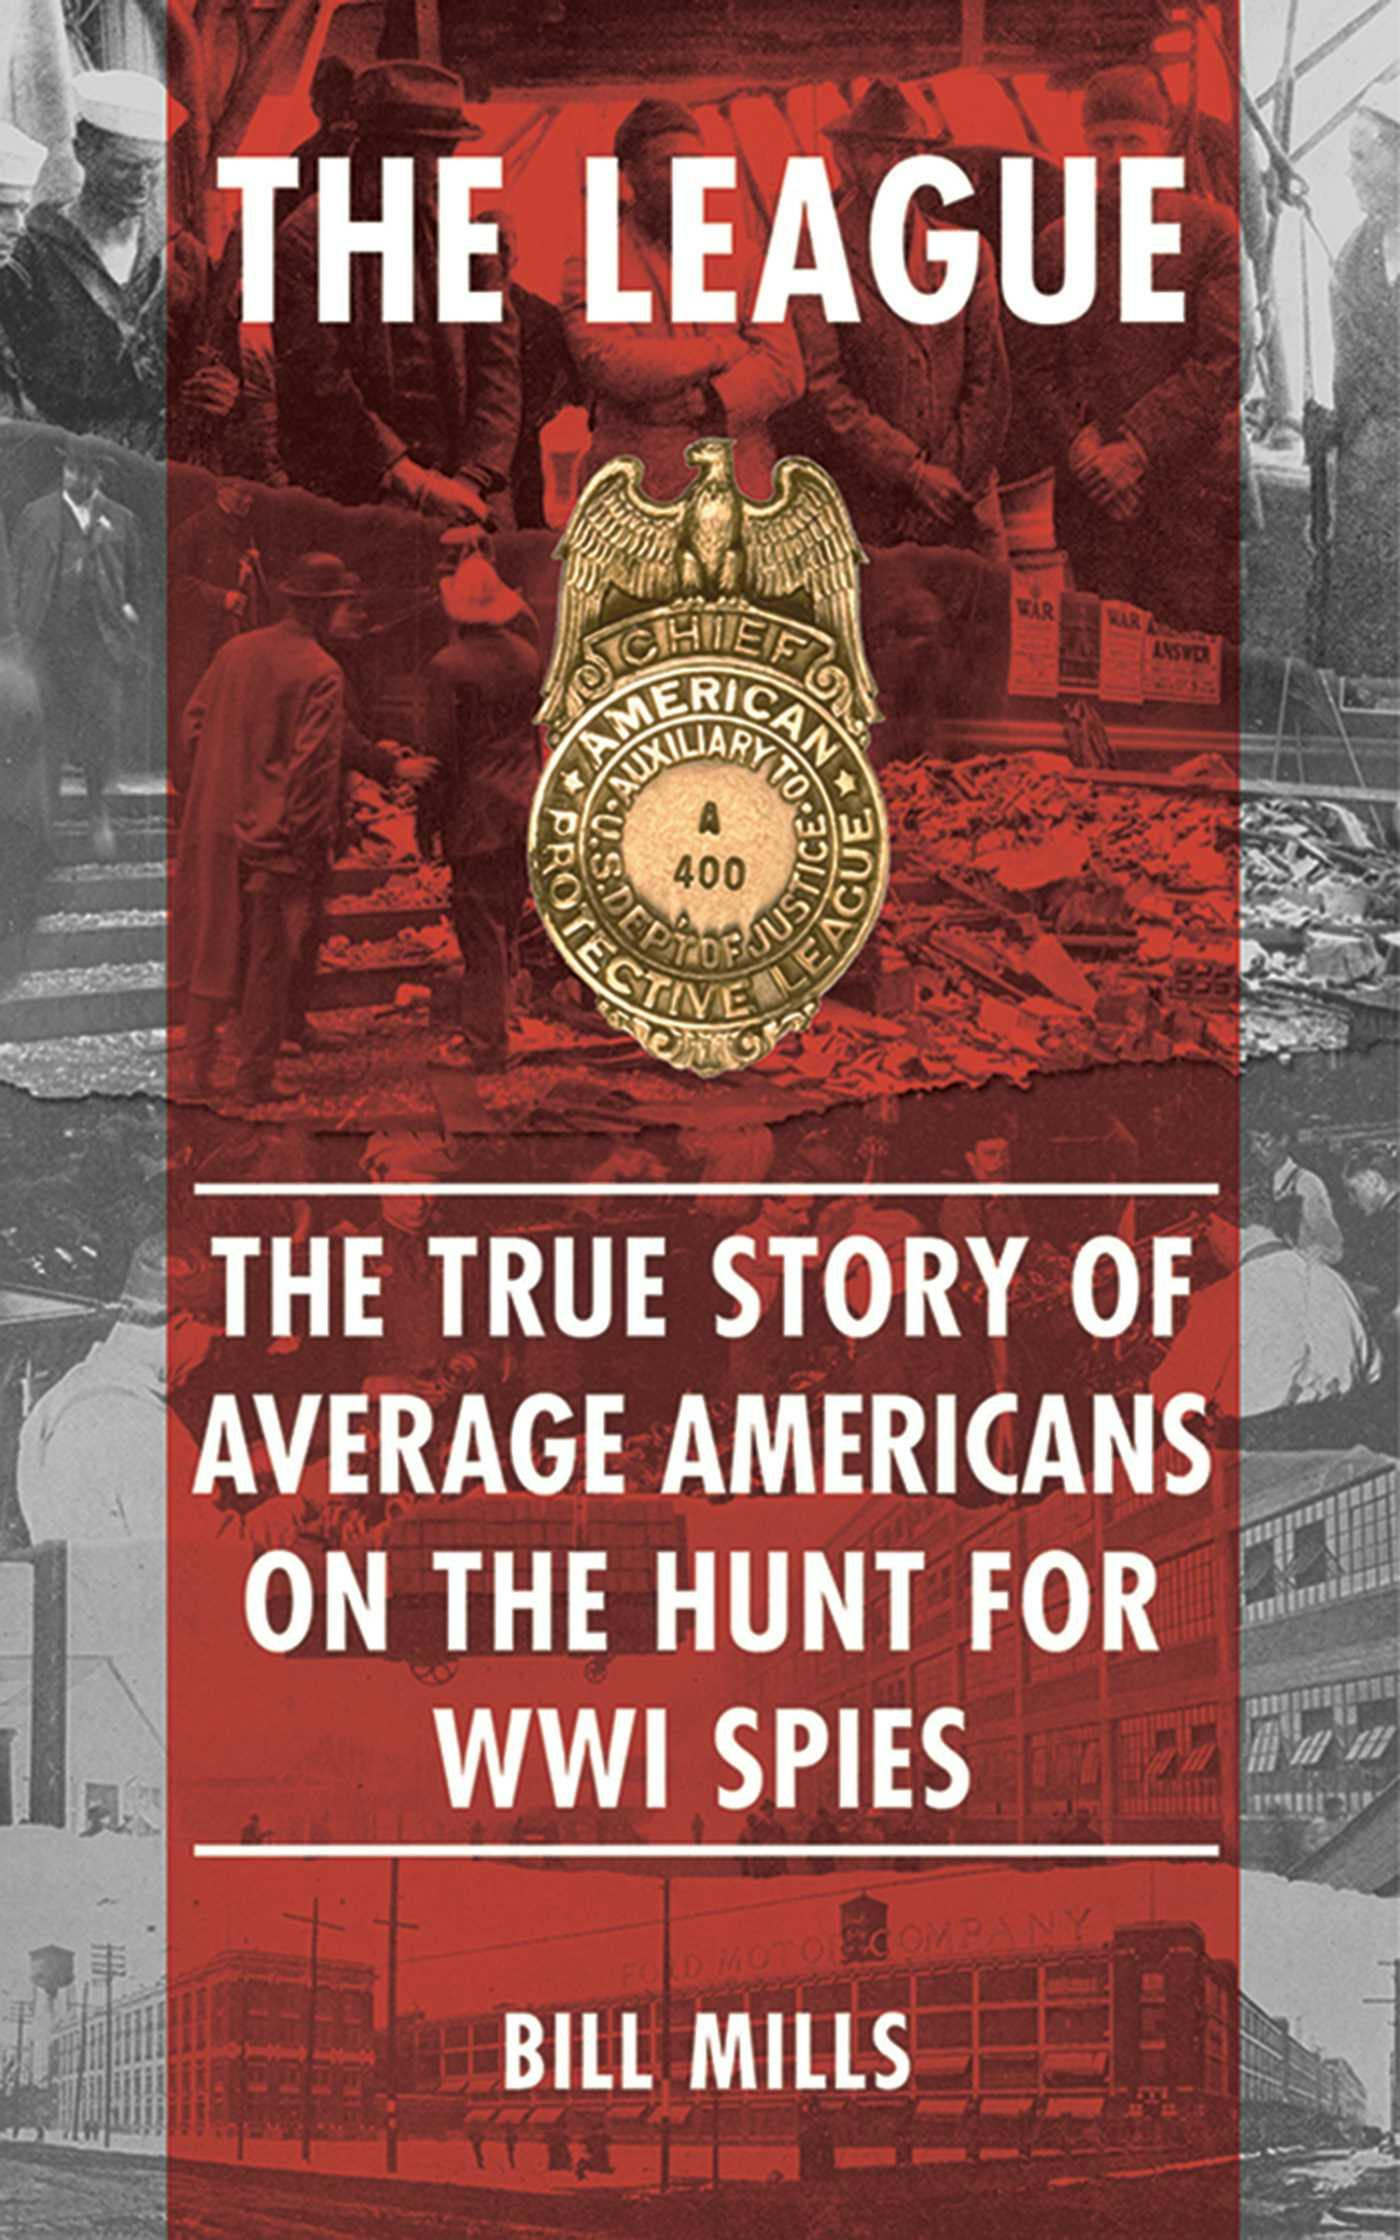 The League: The  True Story of Average Americans on the Hunt for WWI Spies - Bill Mills